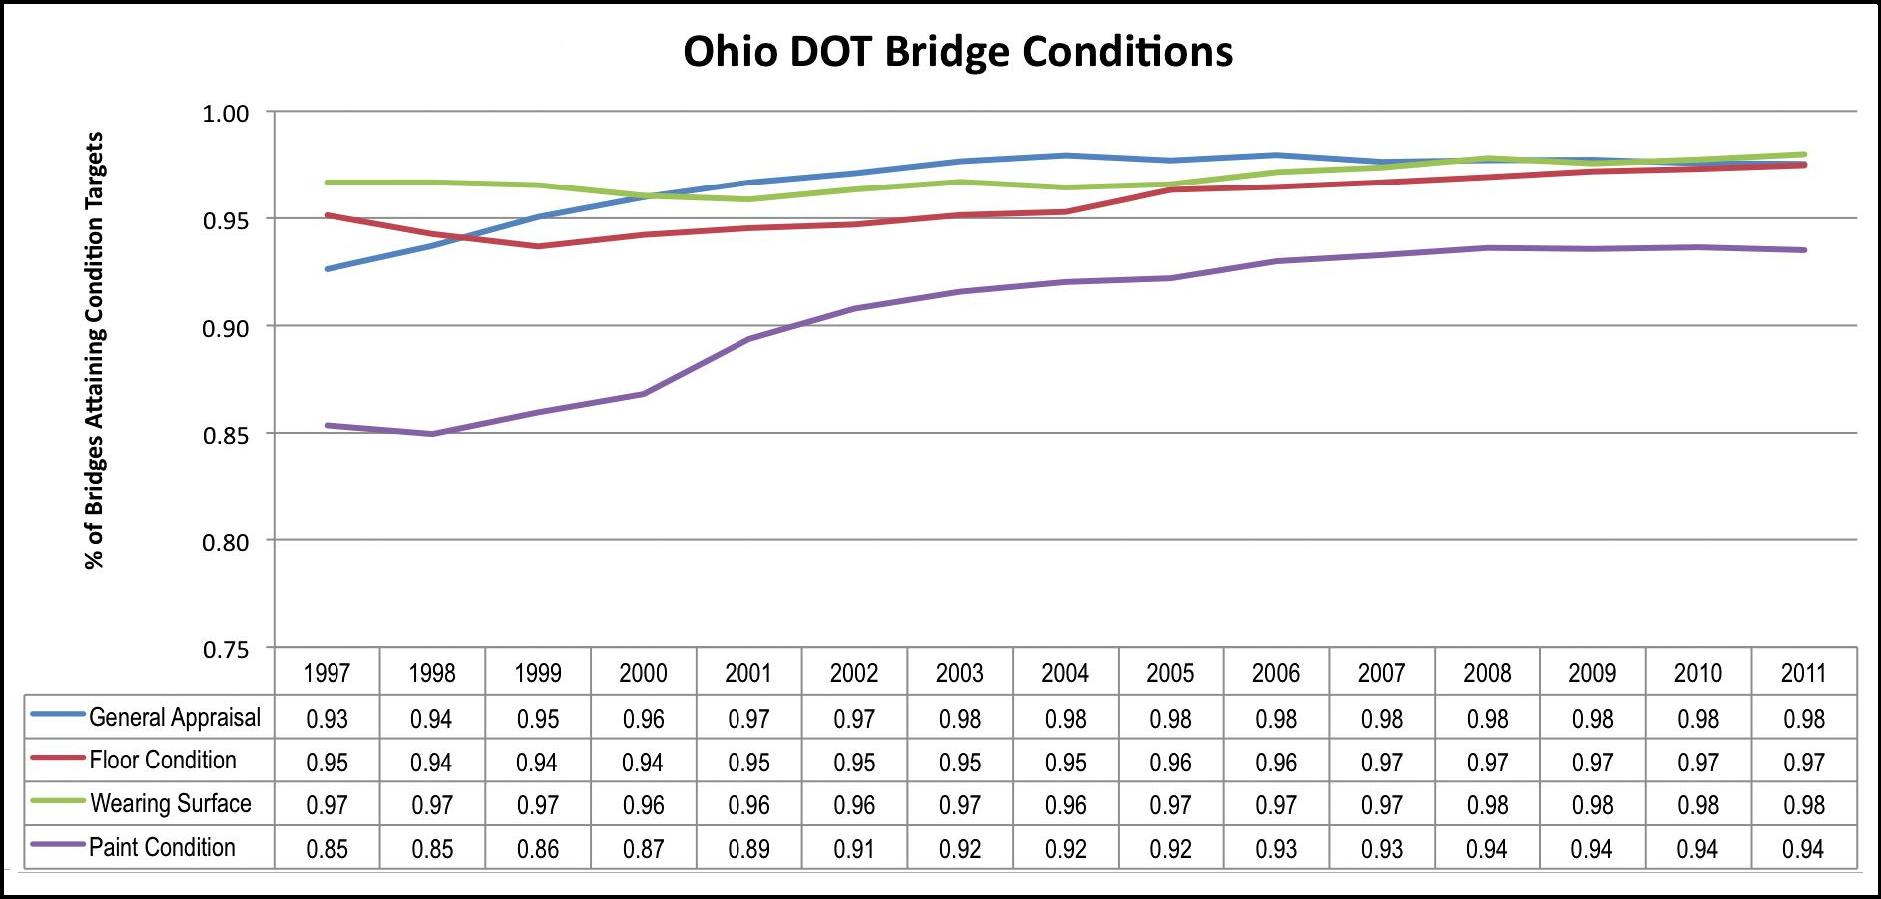 Figure 34 illustrates the trends in Ohio bridge conditions from 1997 to 2011. The trends are tracked in four categories, general appraisal, floor conditions, wearing surfaces and paint conditions.  The trend lines illustrate a steady improvement in condition in all four categories.  In 1997, 93 percent of the bridge area met the department's general appraisal goal rising to 98 percent meeting goal in 2011.  For floor conditions, in 1997, 95 percent of the bridge area met goal and that rose to 97 percent meeting goal by 2011.  For wearing surfaces, 97 percent met goal in 1997 and that increased to 98 percent in 2011. For paint conditions, 85 percent of the bridges met goal and that rose to 94 percent by 2011.